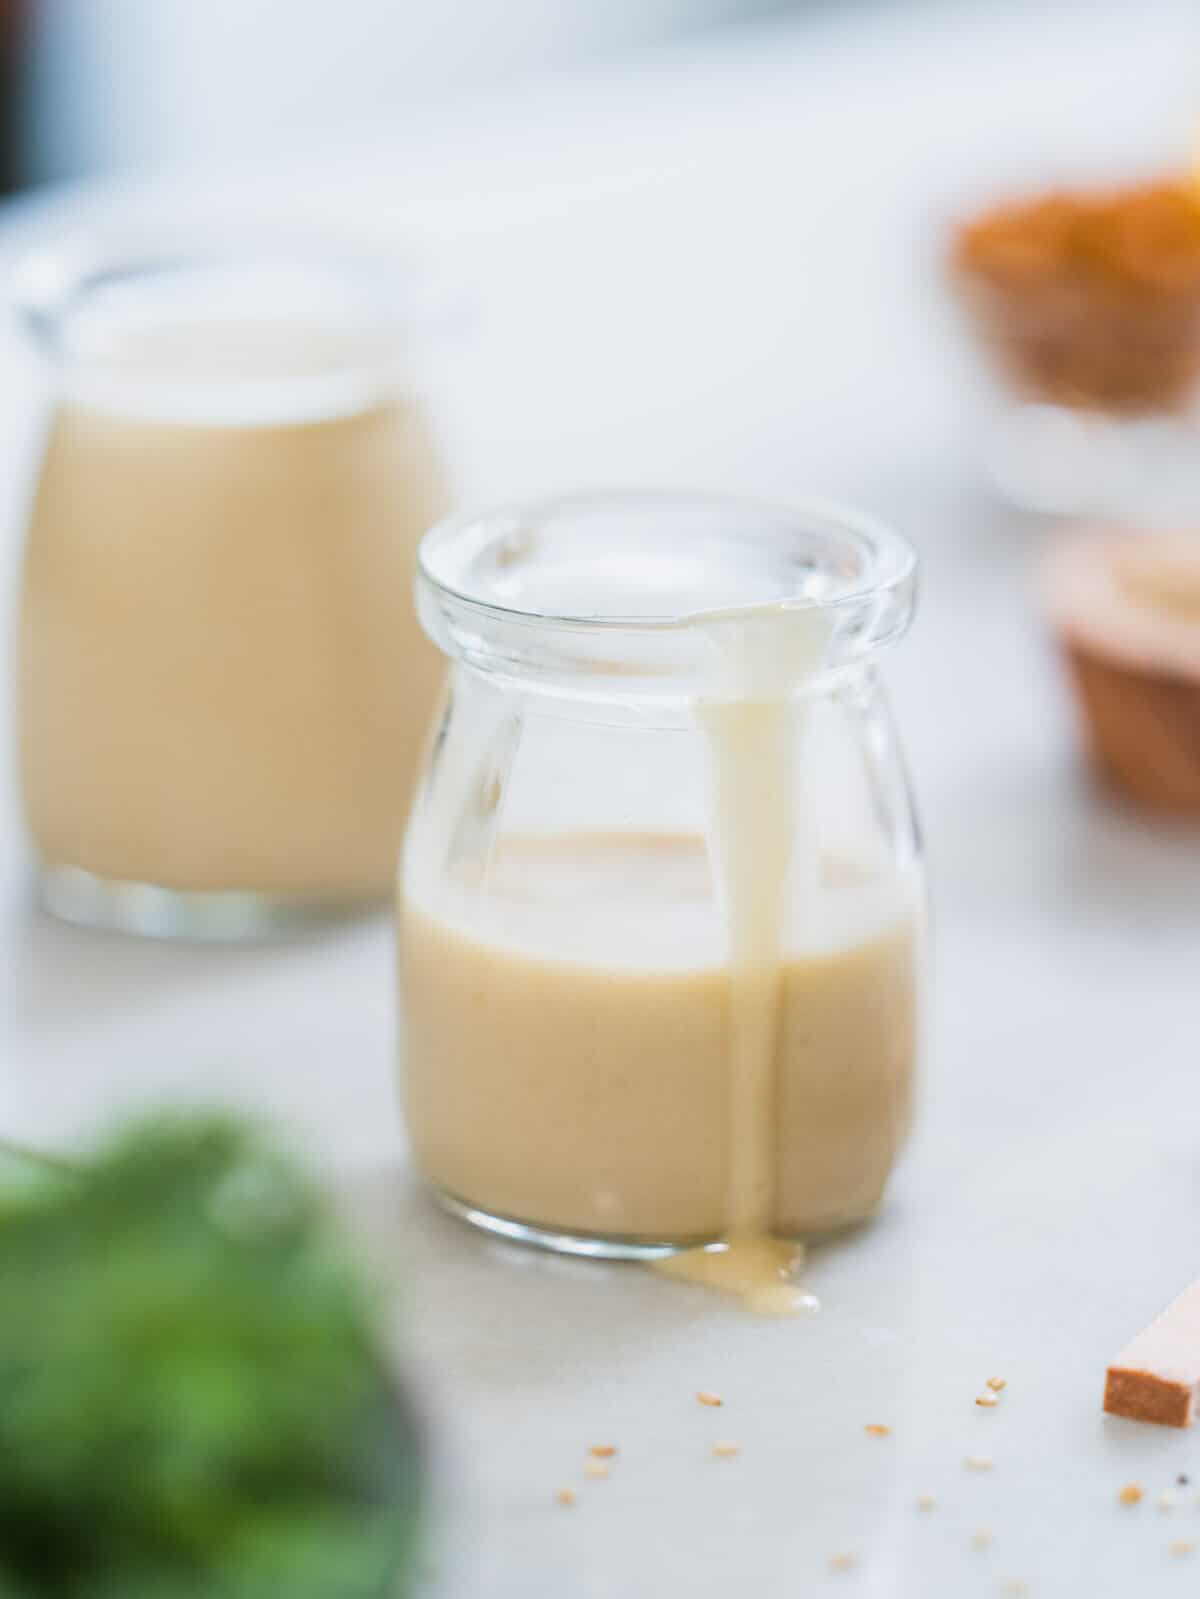 maple tahini dressing in a glass recipient dripping sauce in a table.